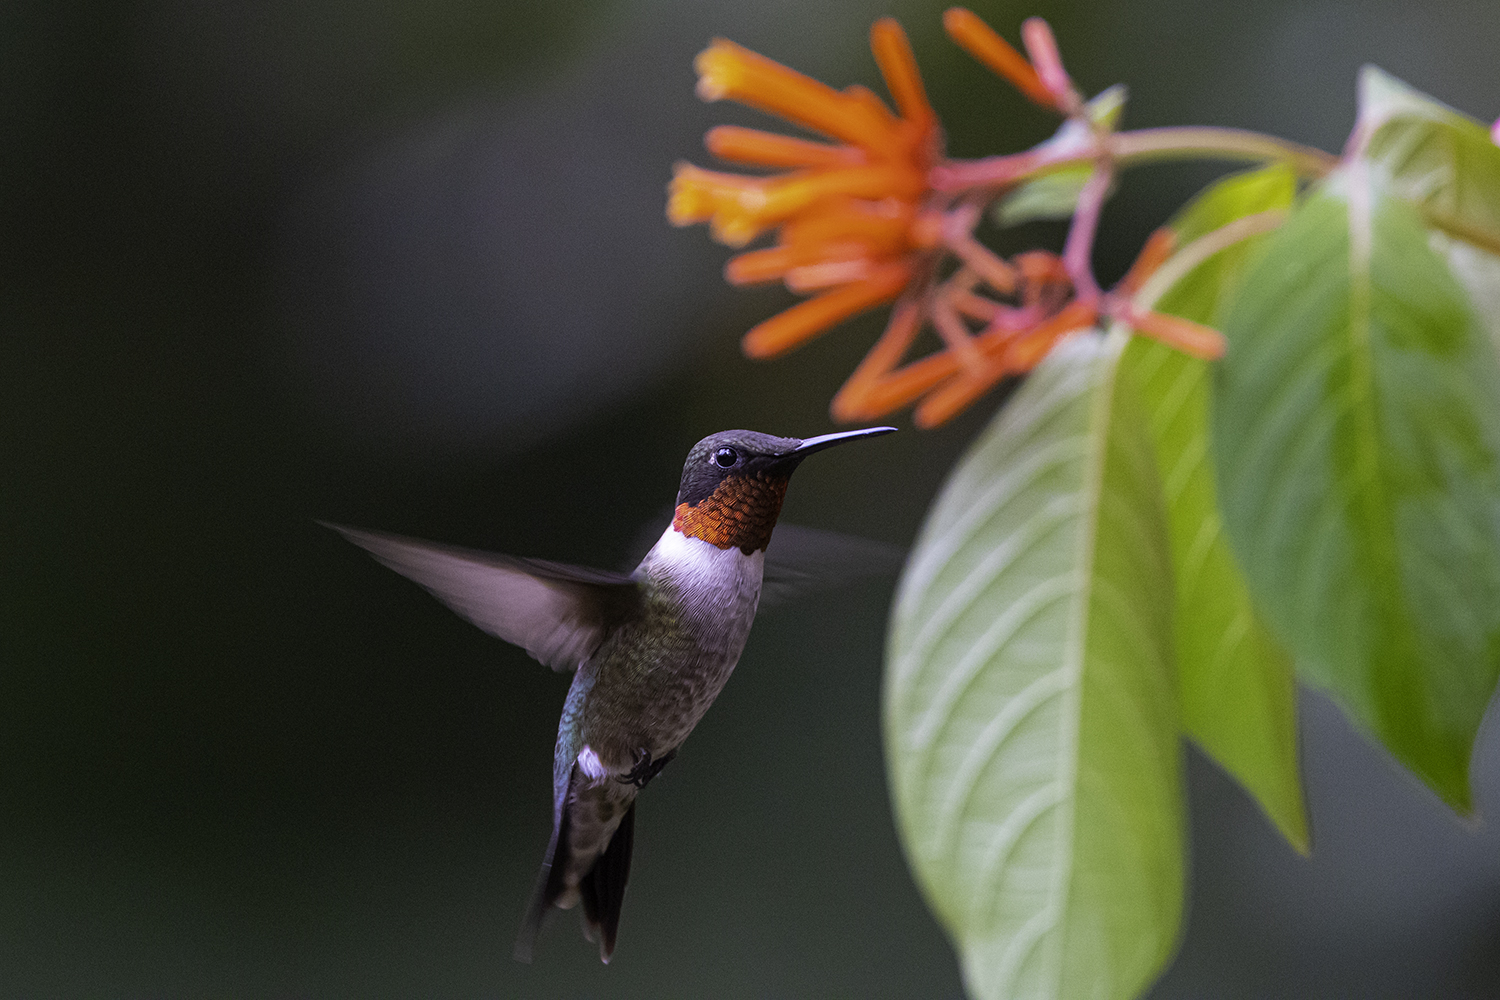 Hummingbird migration: Millions are headed to Texas to fatten up